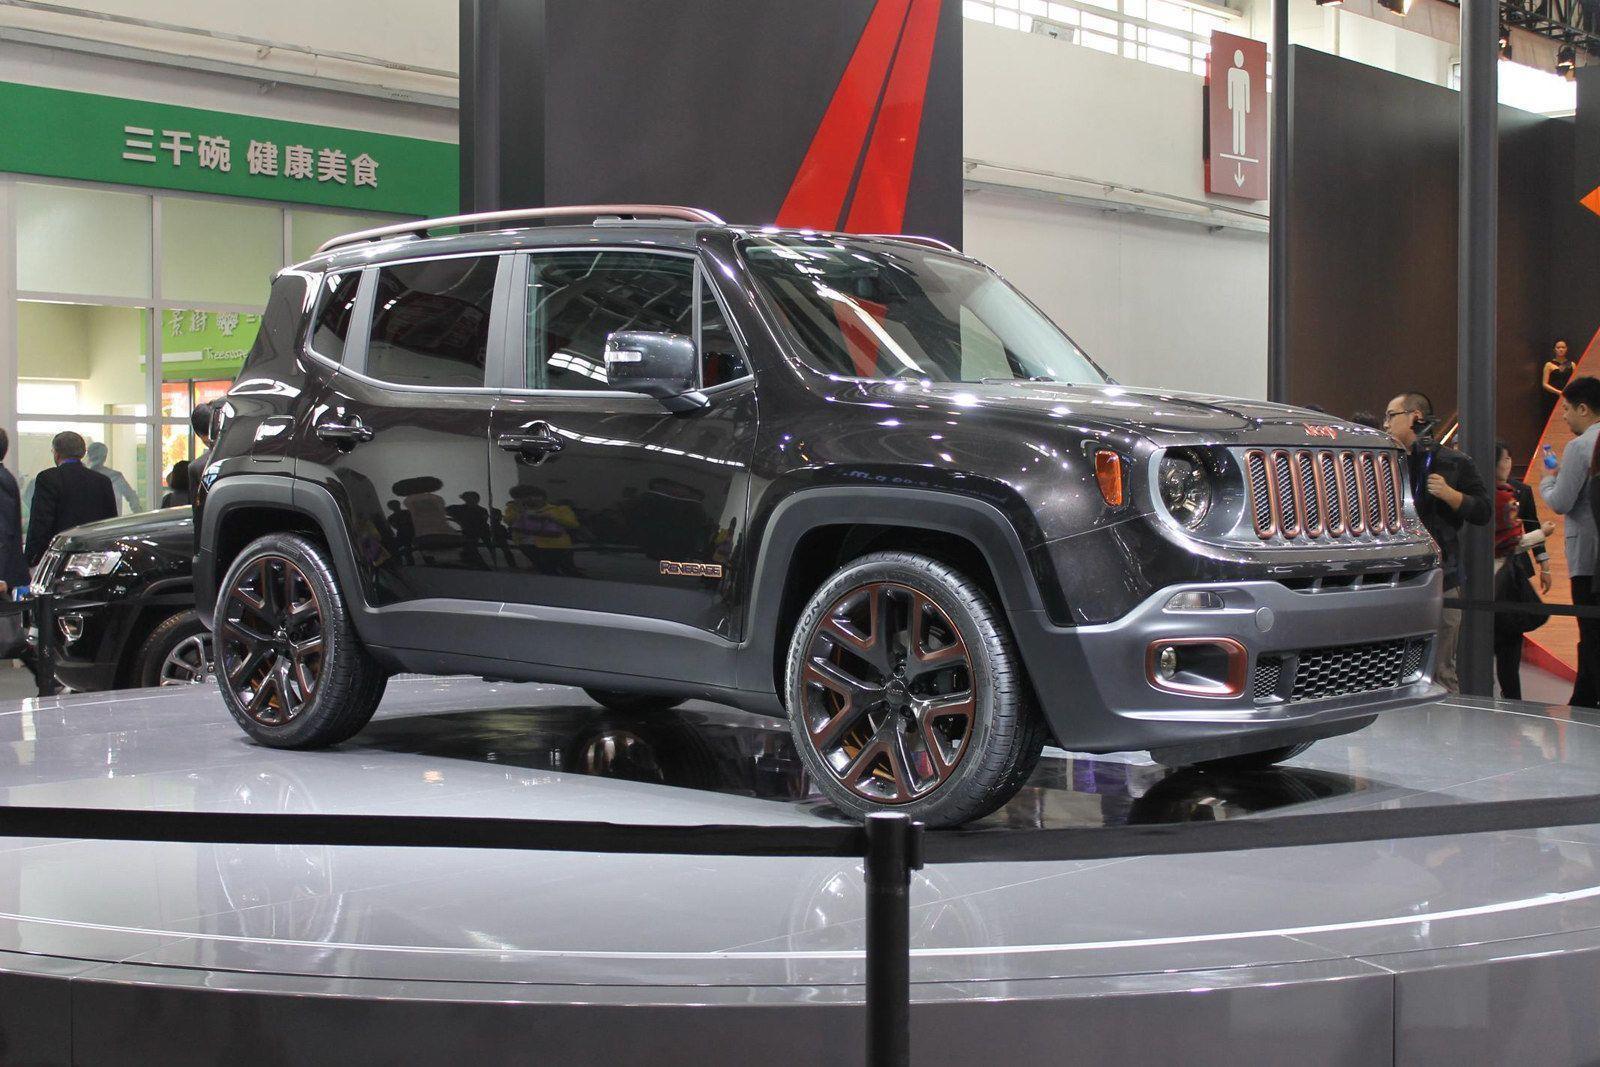 All New Jeep Renegade Black Wallpaper High Resolution 28727